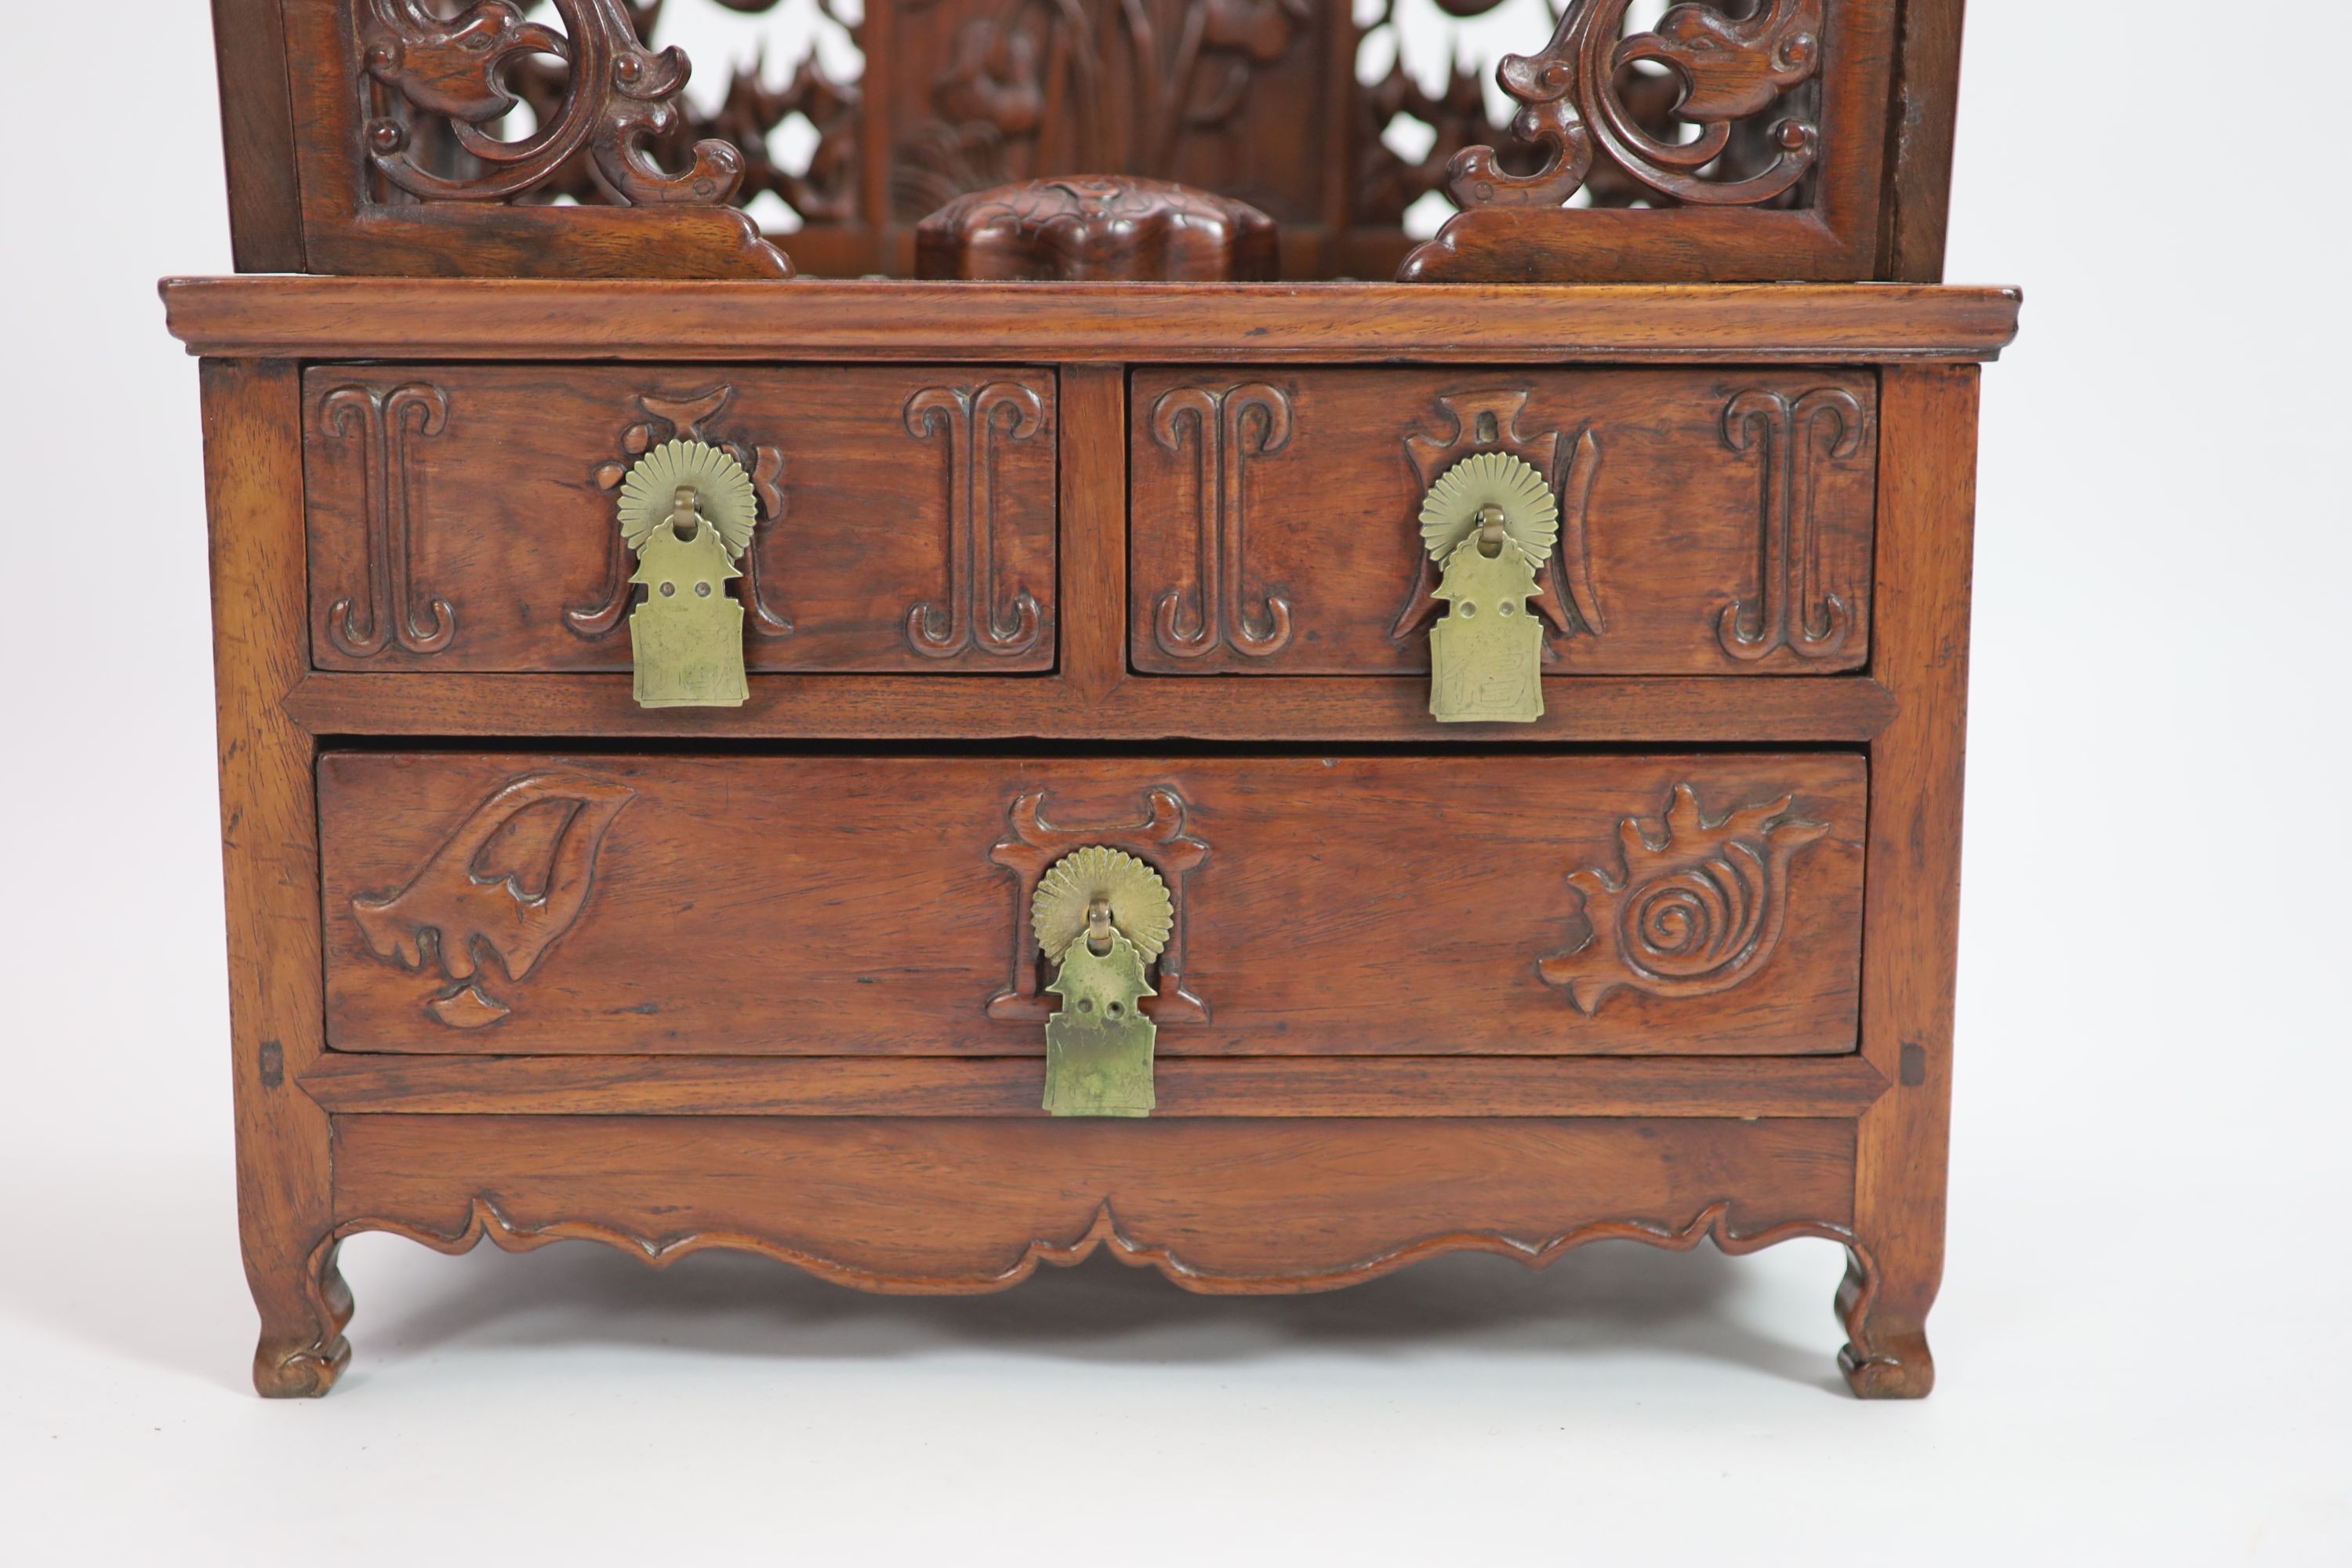 A fine Chinese huanghuali table cabinet, early Qing dynasty, 17th/18th century, 57.5 cm high, 42.5 cm wide